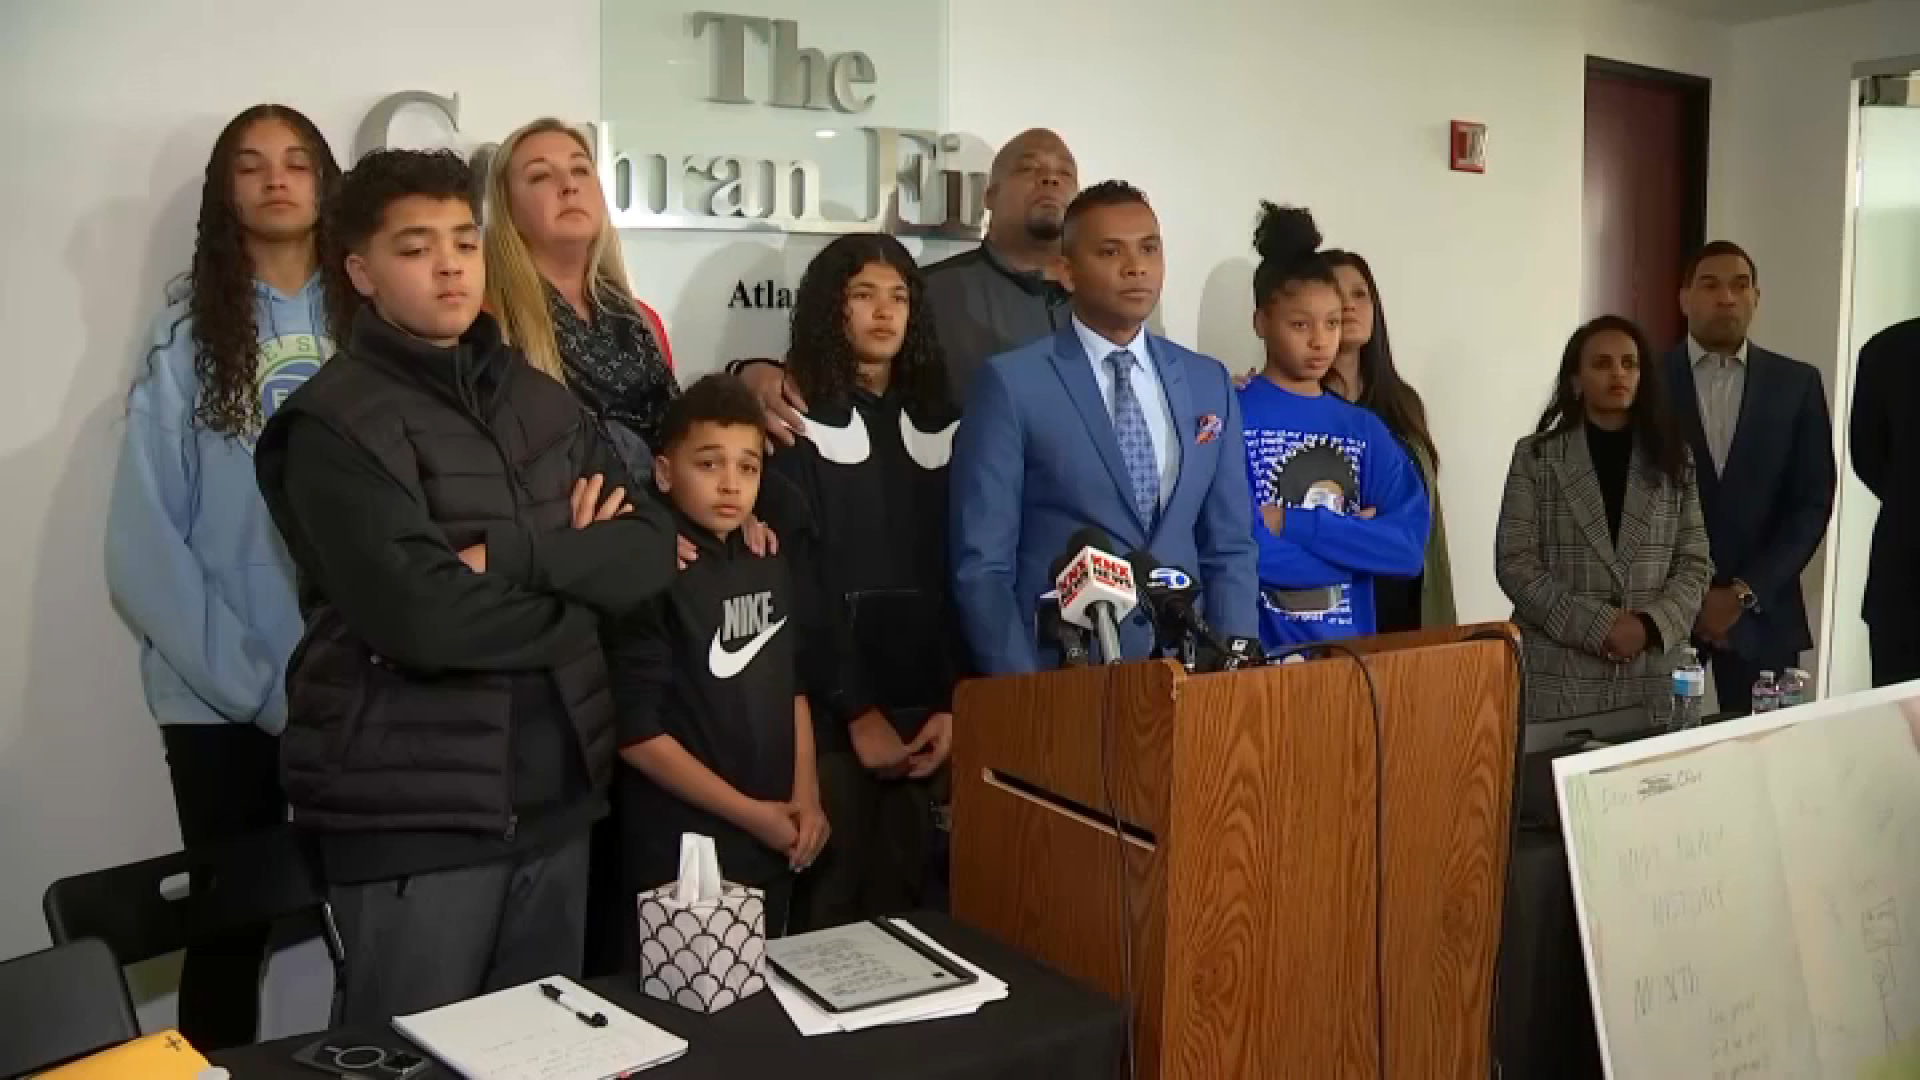 Families Claim Years of Racist Abuse at Upland Elementary School